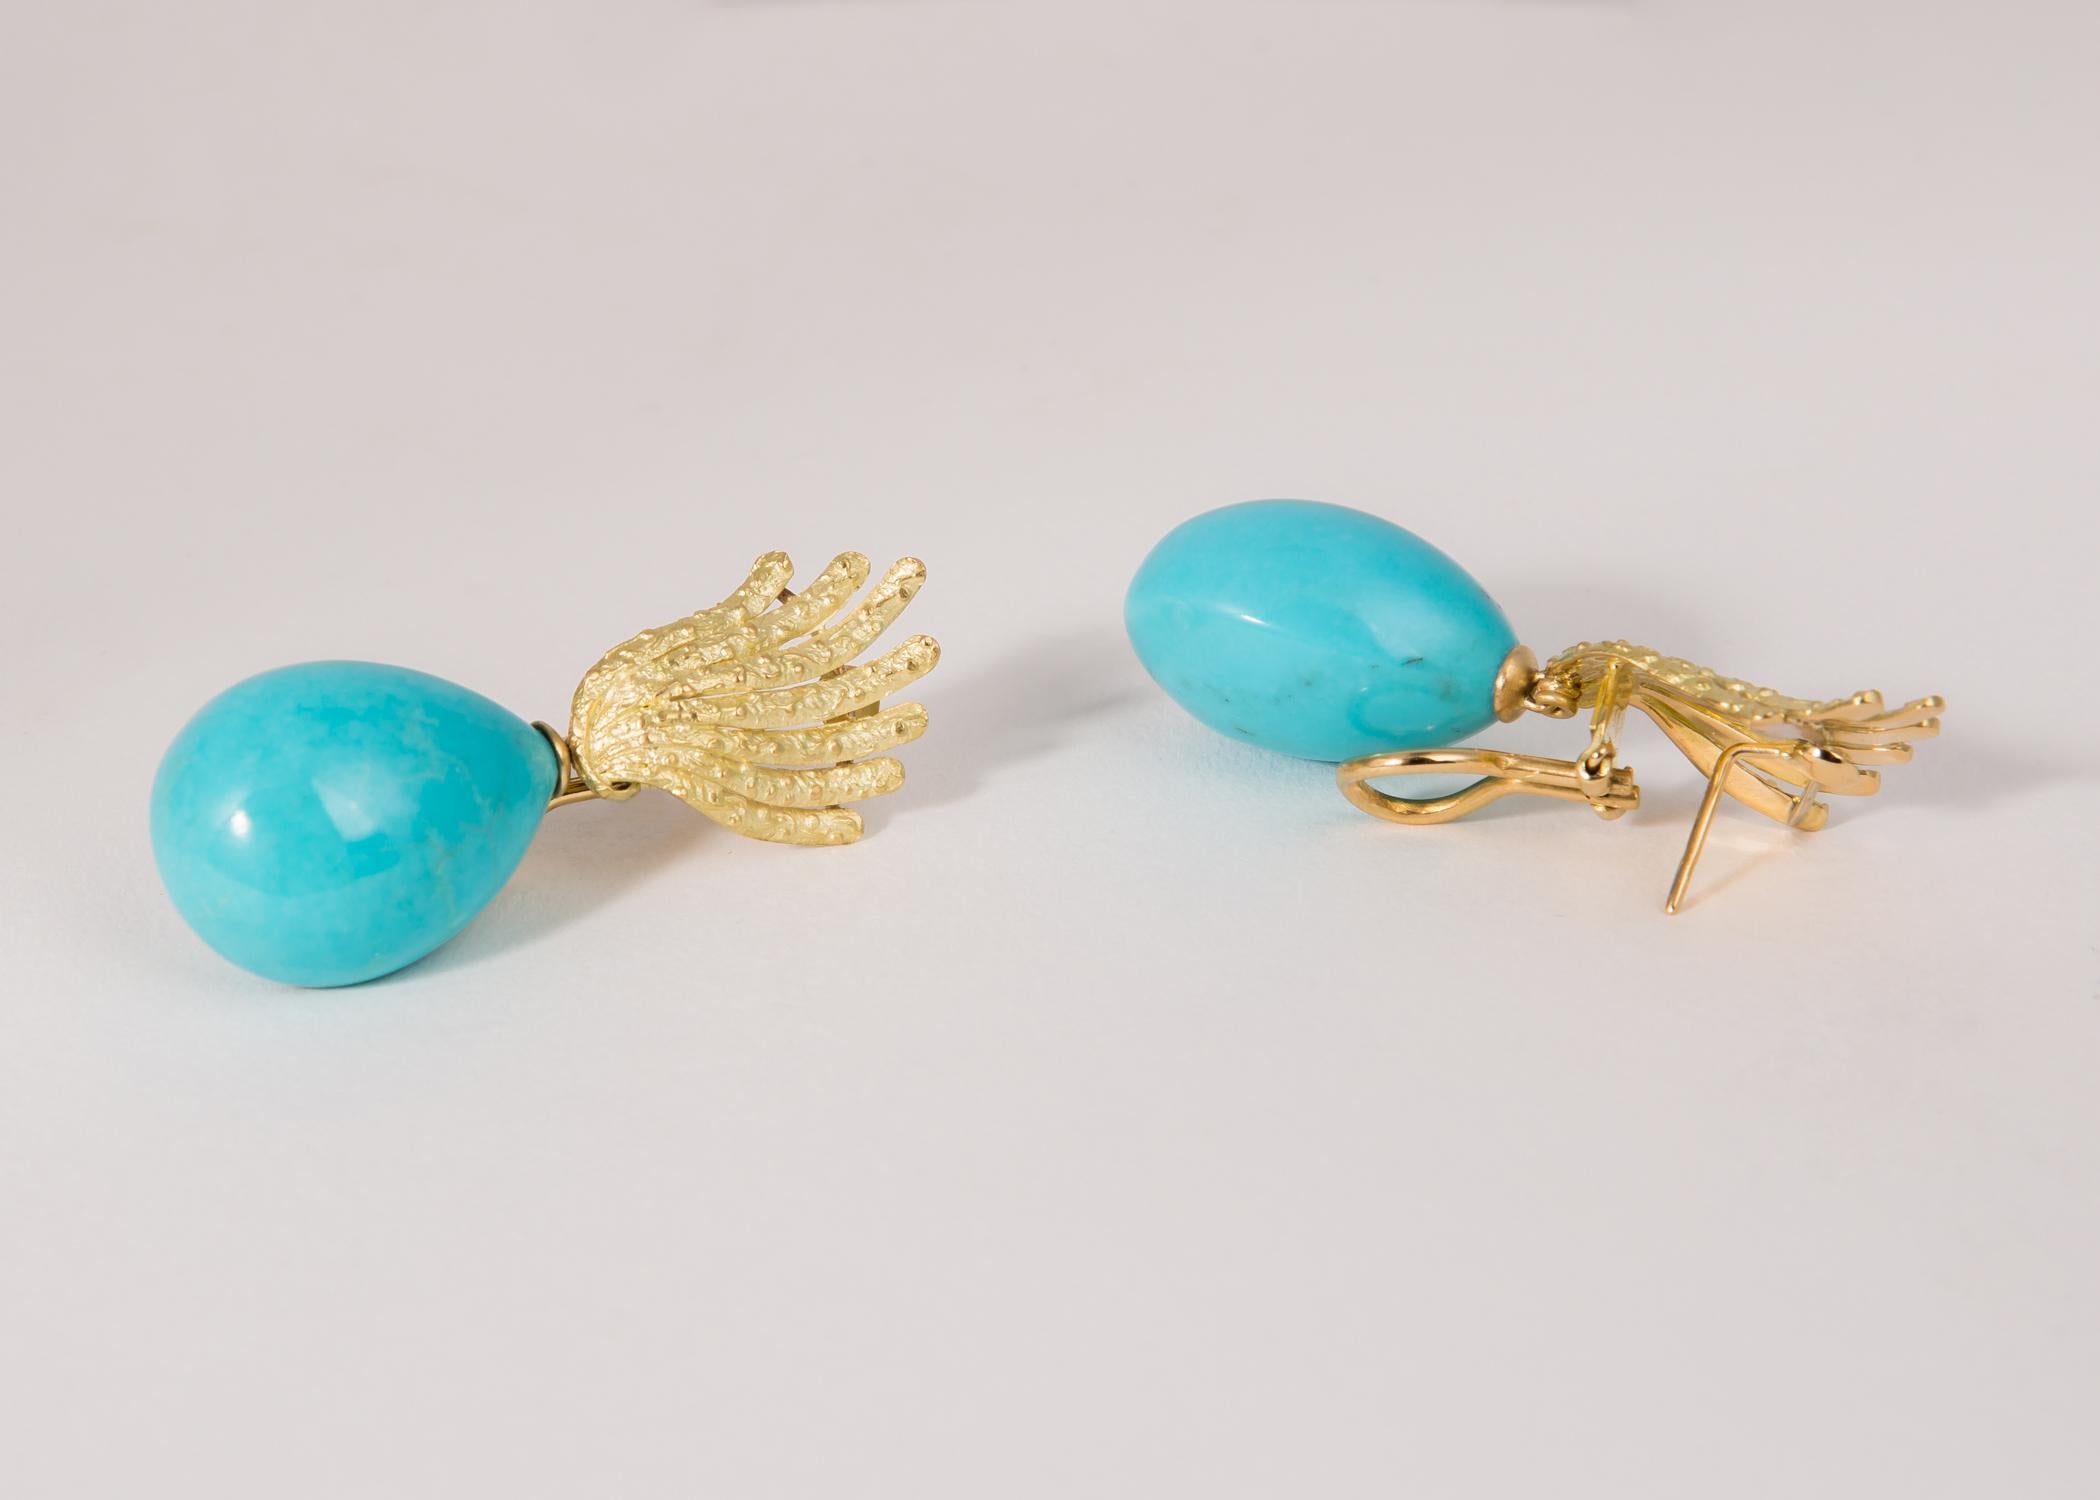 Tiffany & Co. Americas Jeweler. Their classic style and quality shine through in this gorgeous turquoise and gold earring. 1 7/8's inches long.